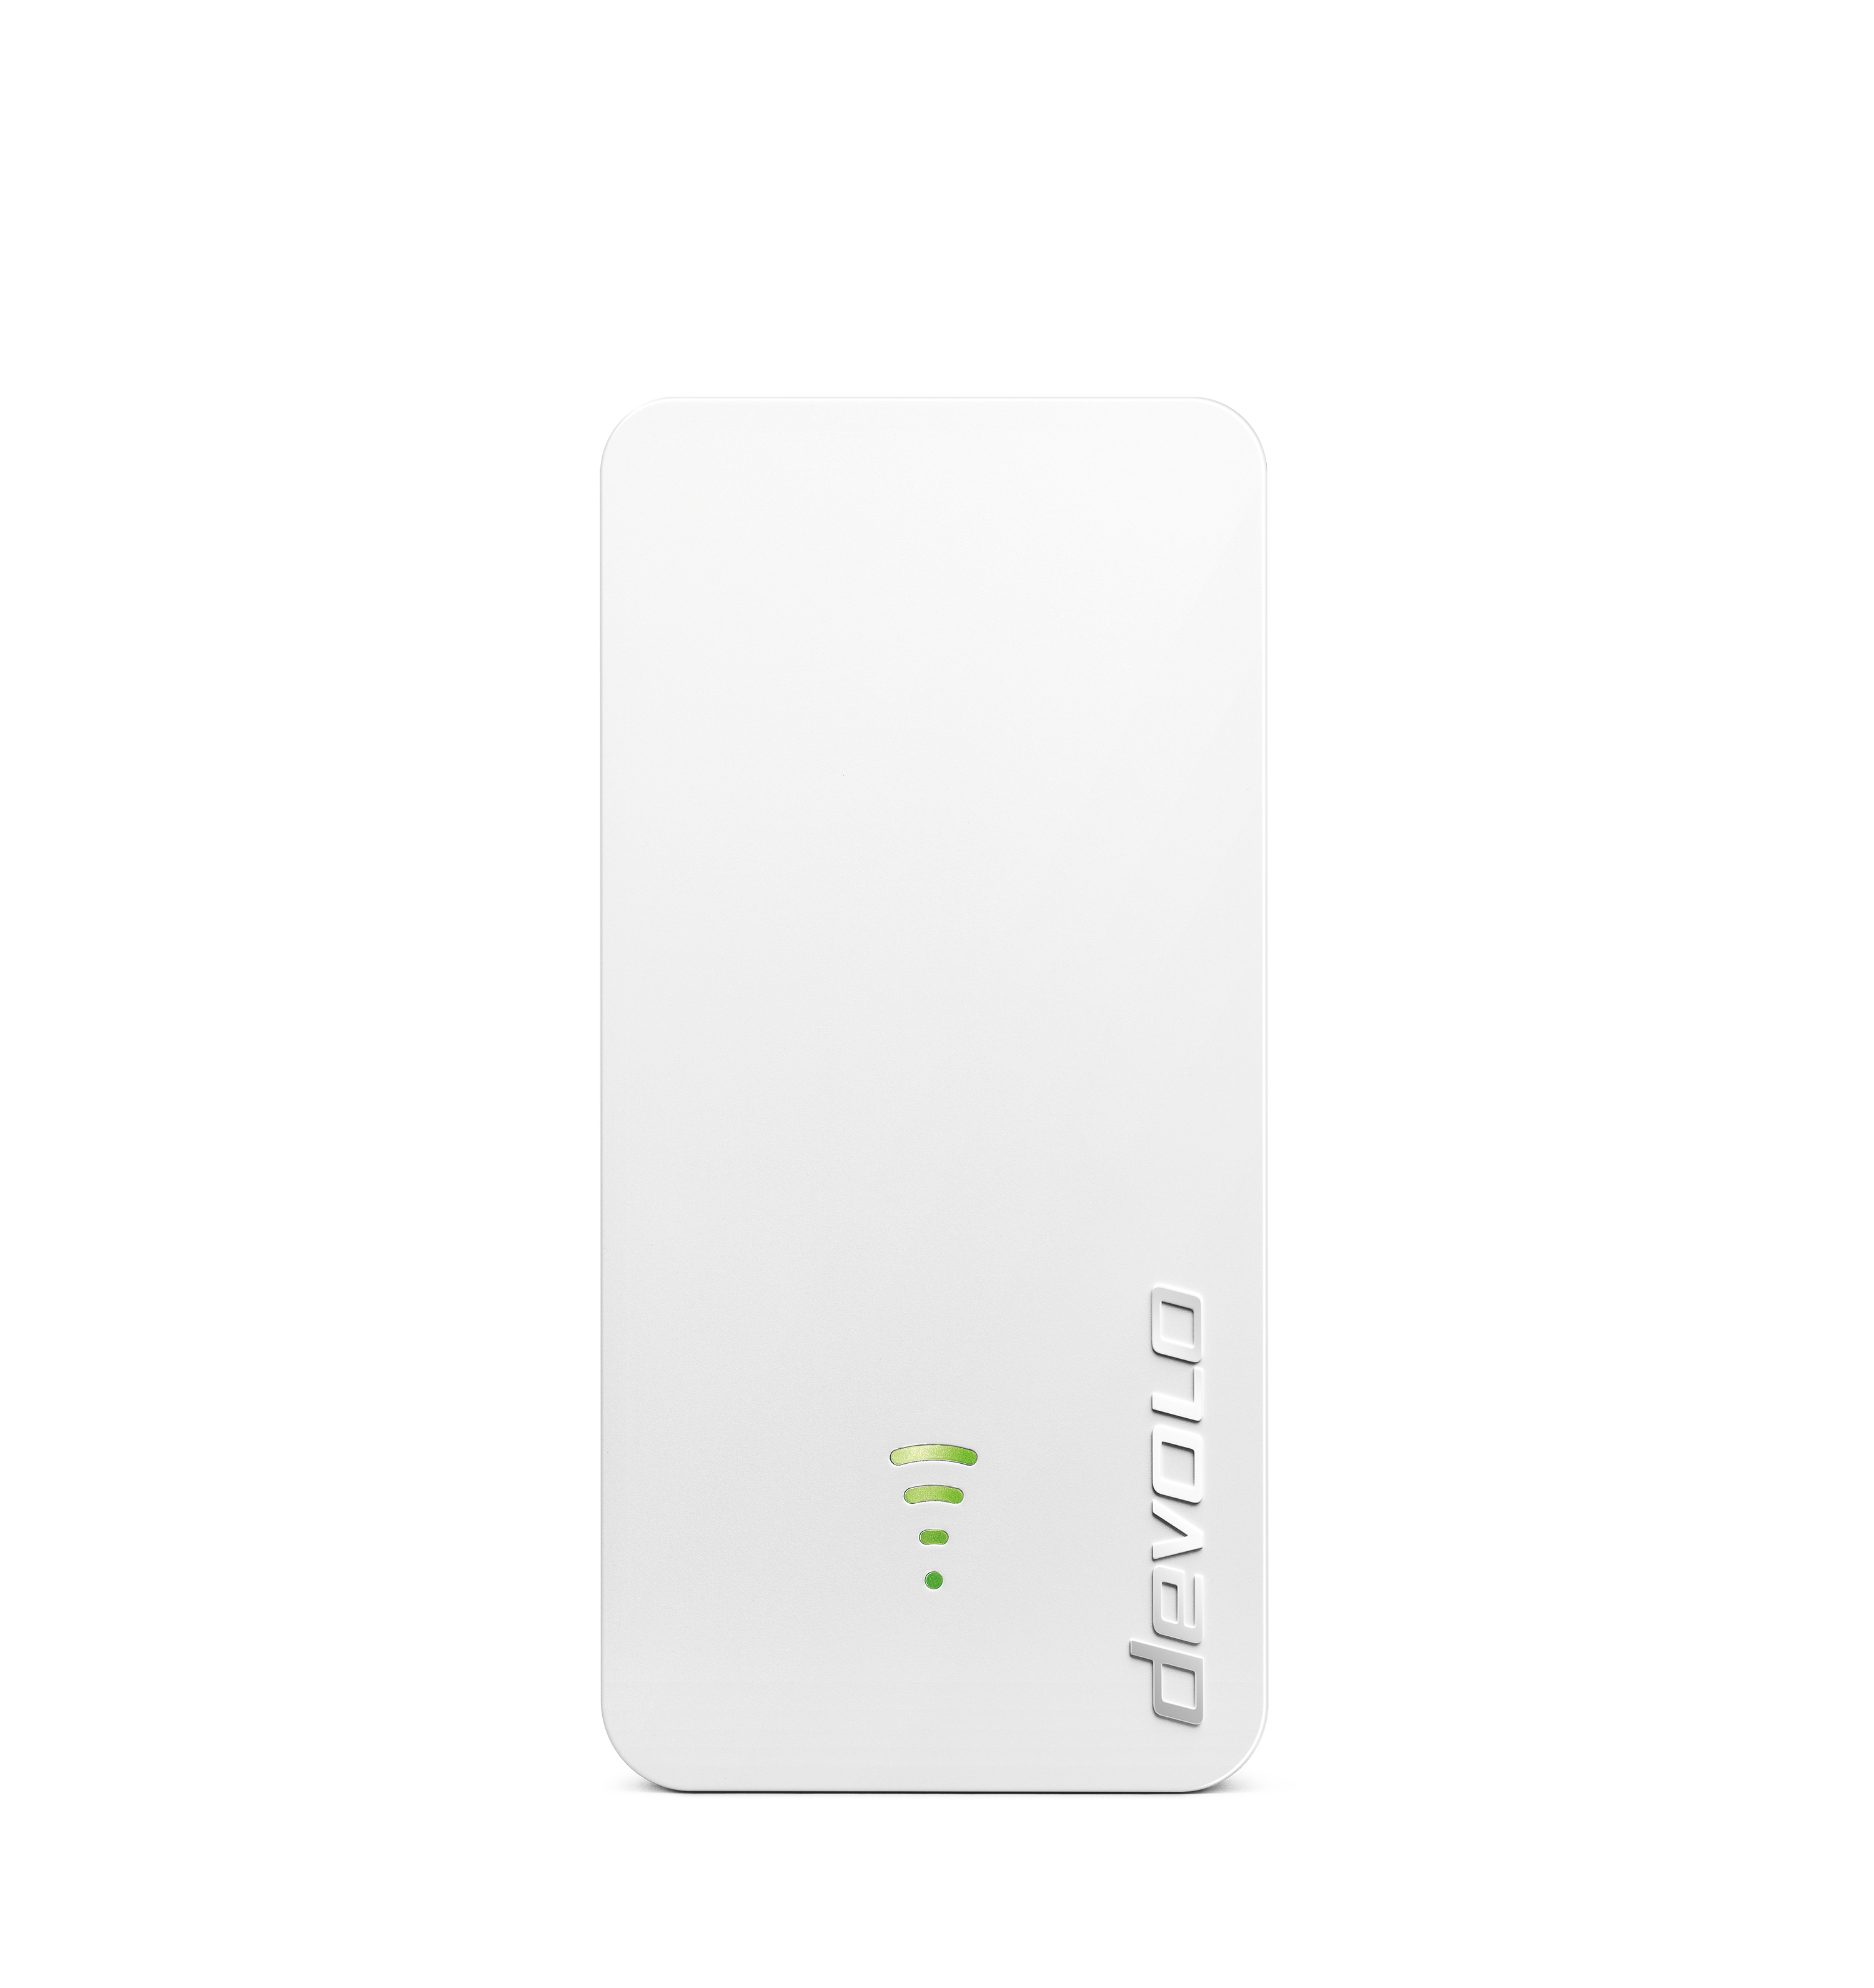 Devolo WiFi Repeater AC 1200 Mbps 1x Gigabit Access Point